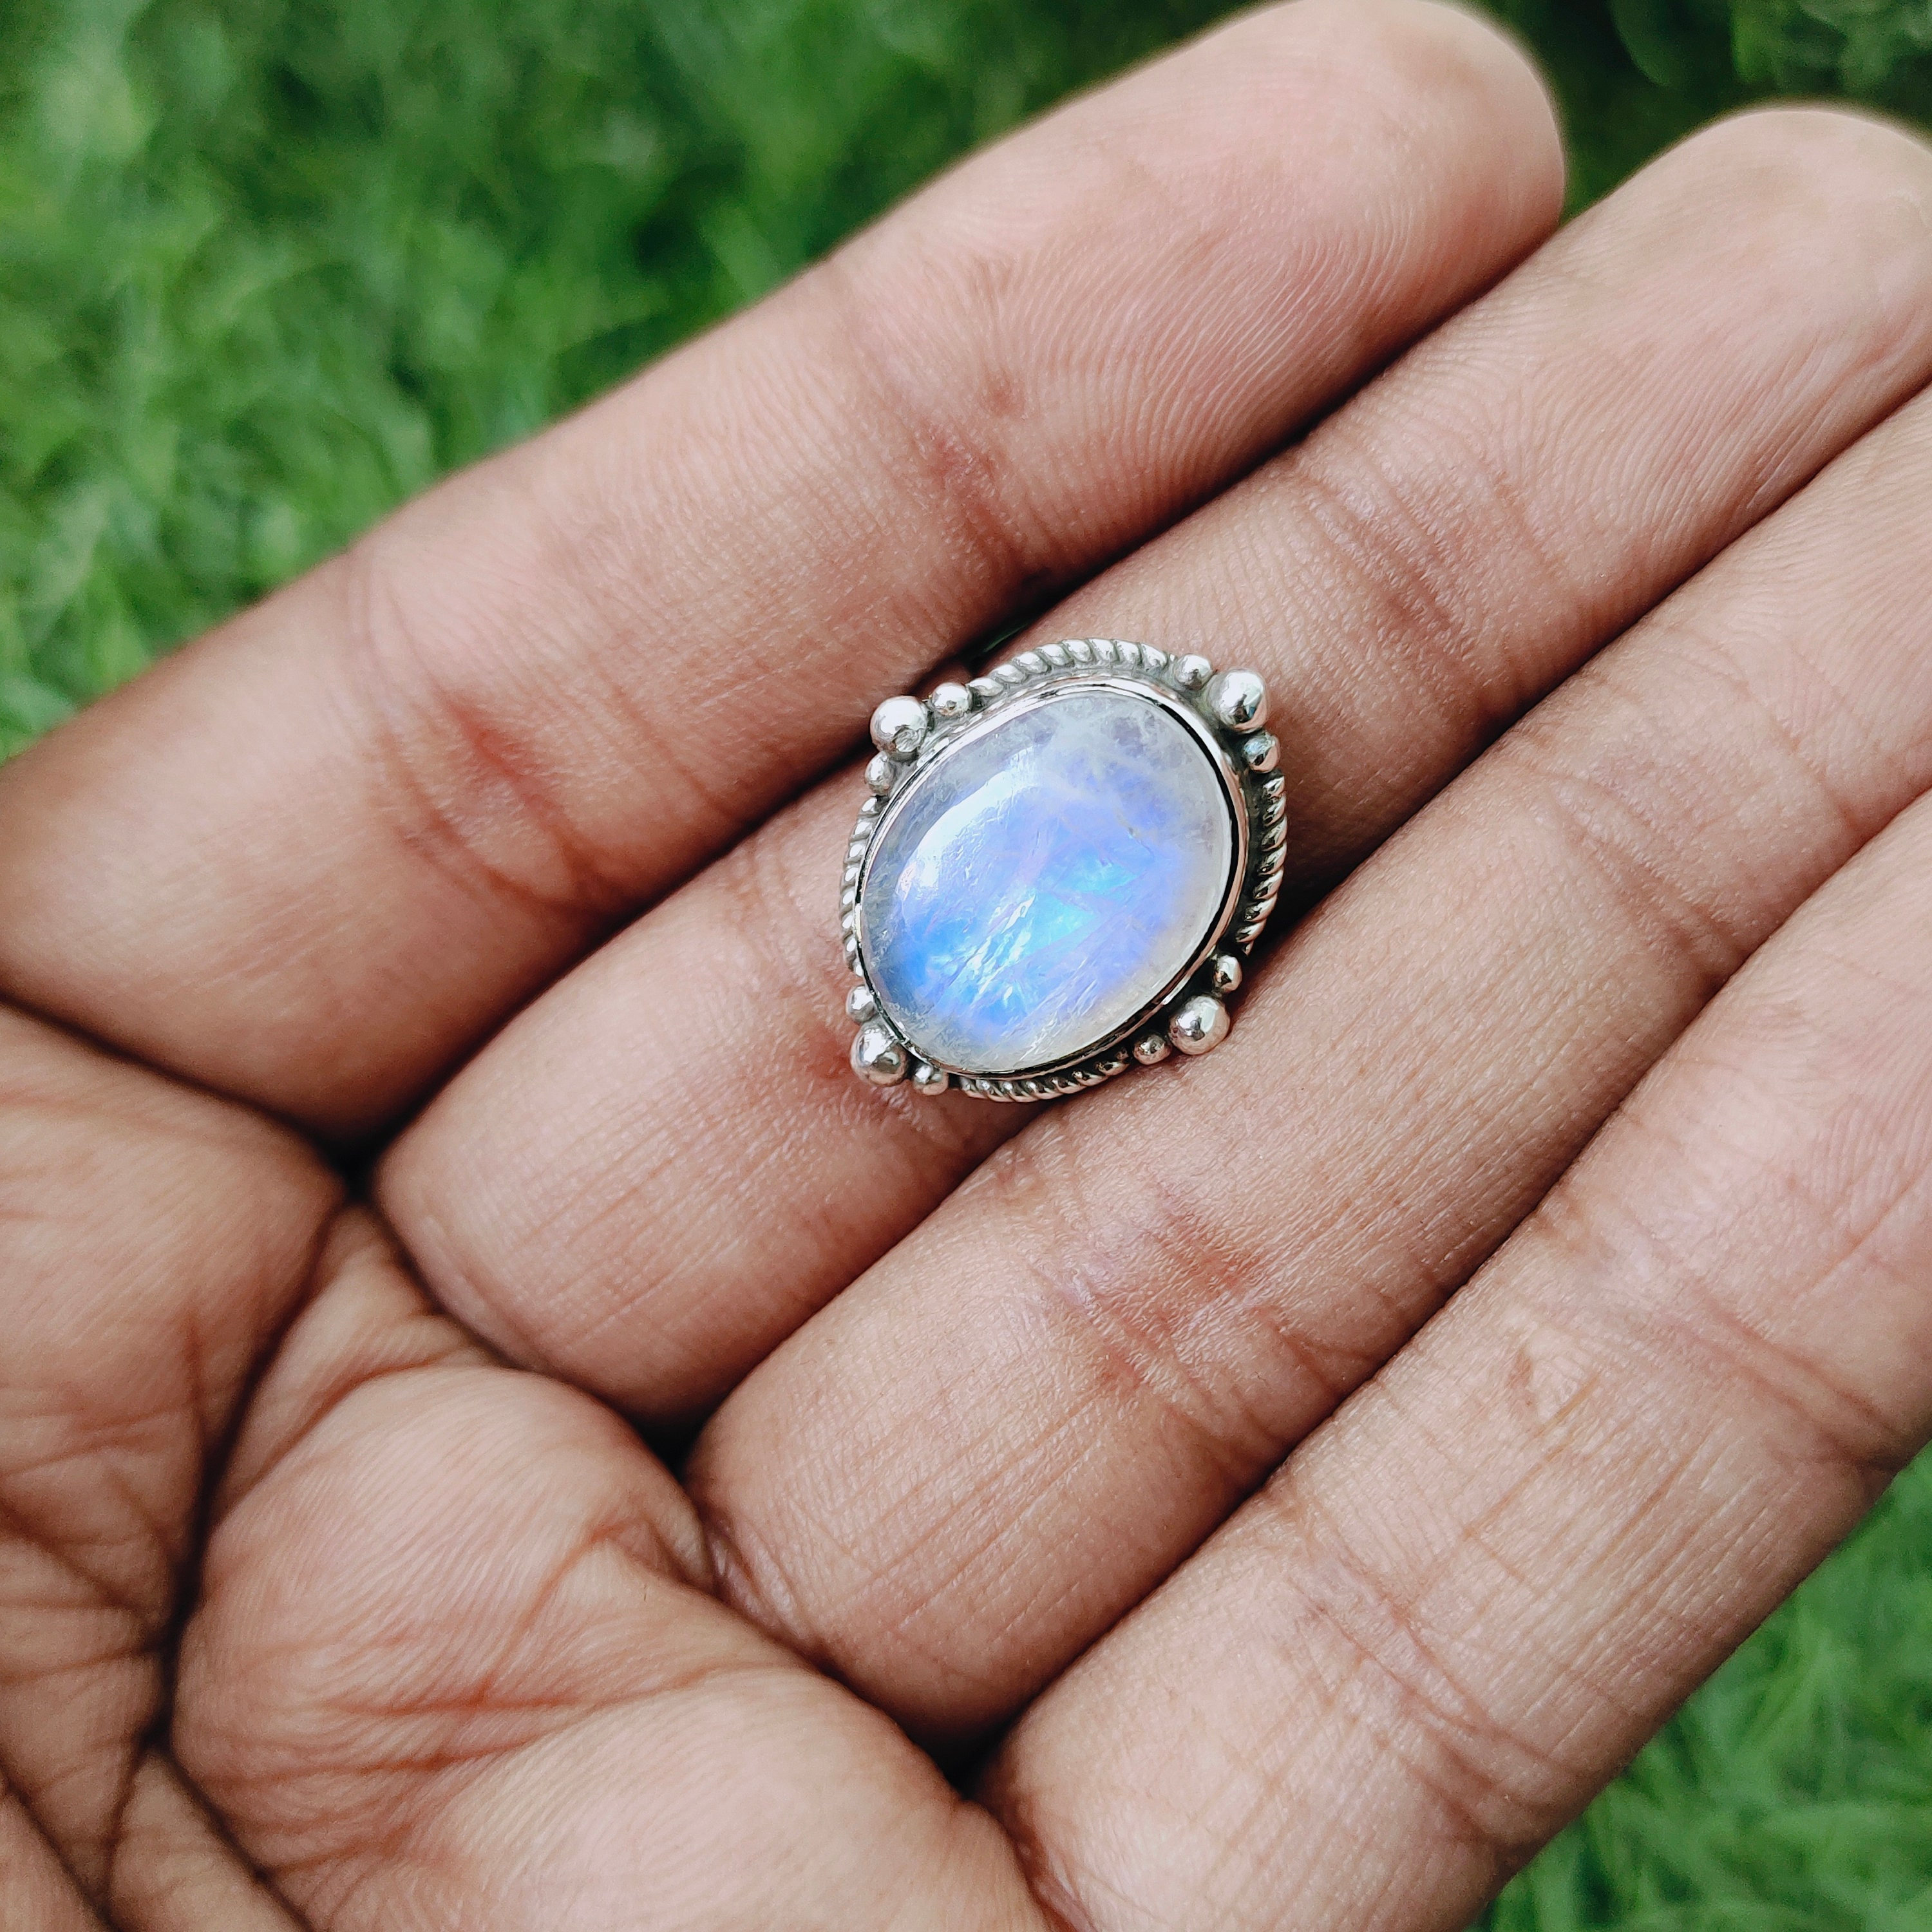 Buy Moonstone Ring, Gemstone Ring, 925 Sterling Silver Ring, Band Ring,  Beatiful Ring, Pre Wedding Gift, Etsy Sale, Round Shape Stone Online in  India - Etsy